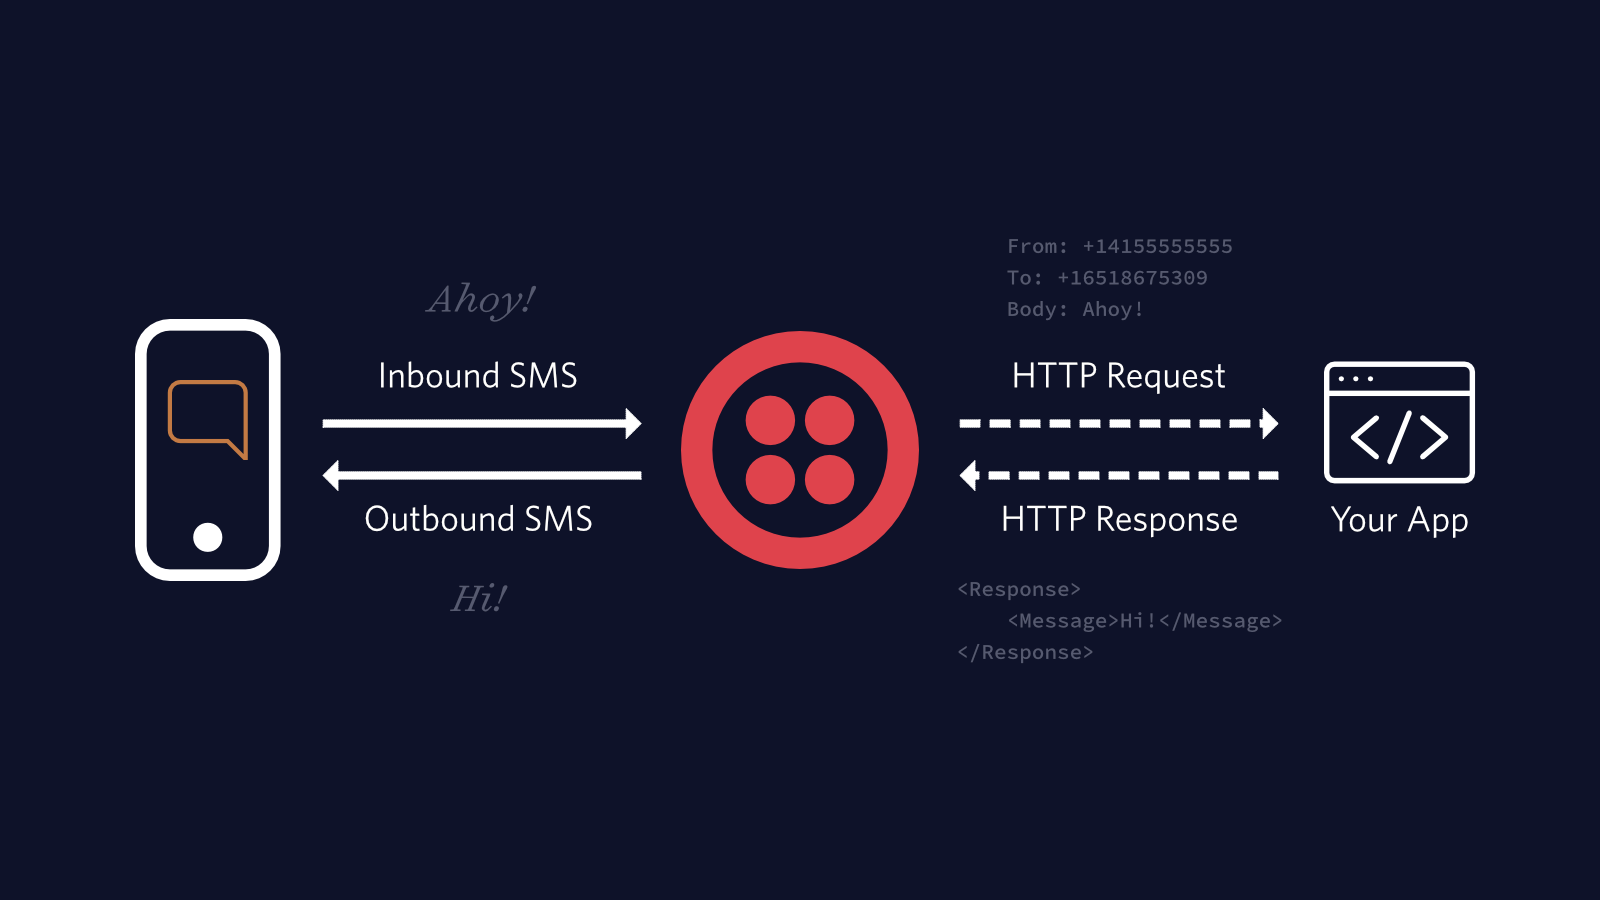 Diagram showing how SMS messages interact with Twilio and your application using webhooks